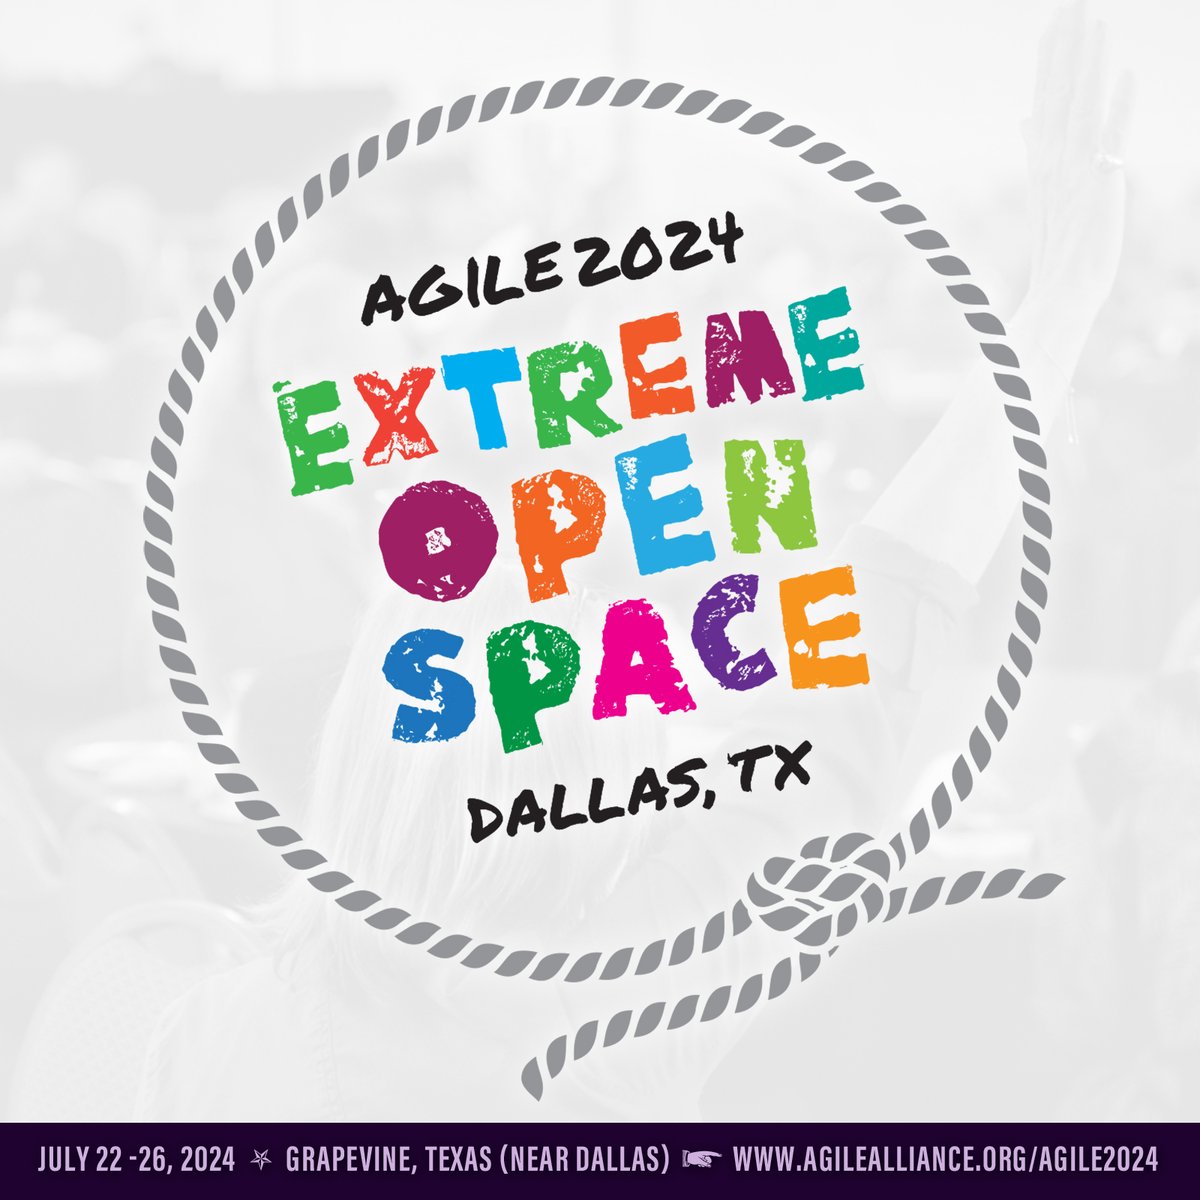 Something big is coming to #Agile2024! We think that #OpenSpace learning is so valuable that we’re dedicating our entire Wednesday program schedule (after the keynote) to this format. But something THIS BIG needs a new name – meet Extreme Open Space! agilealliance.org/agile2024/extr…